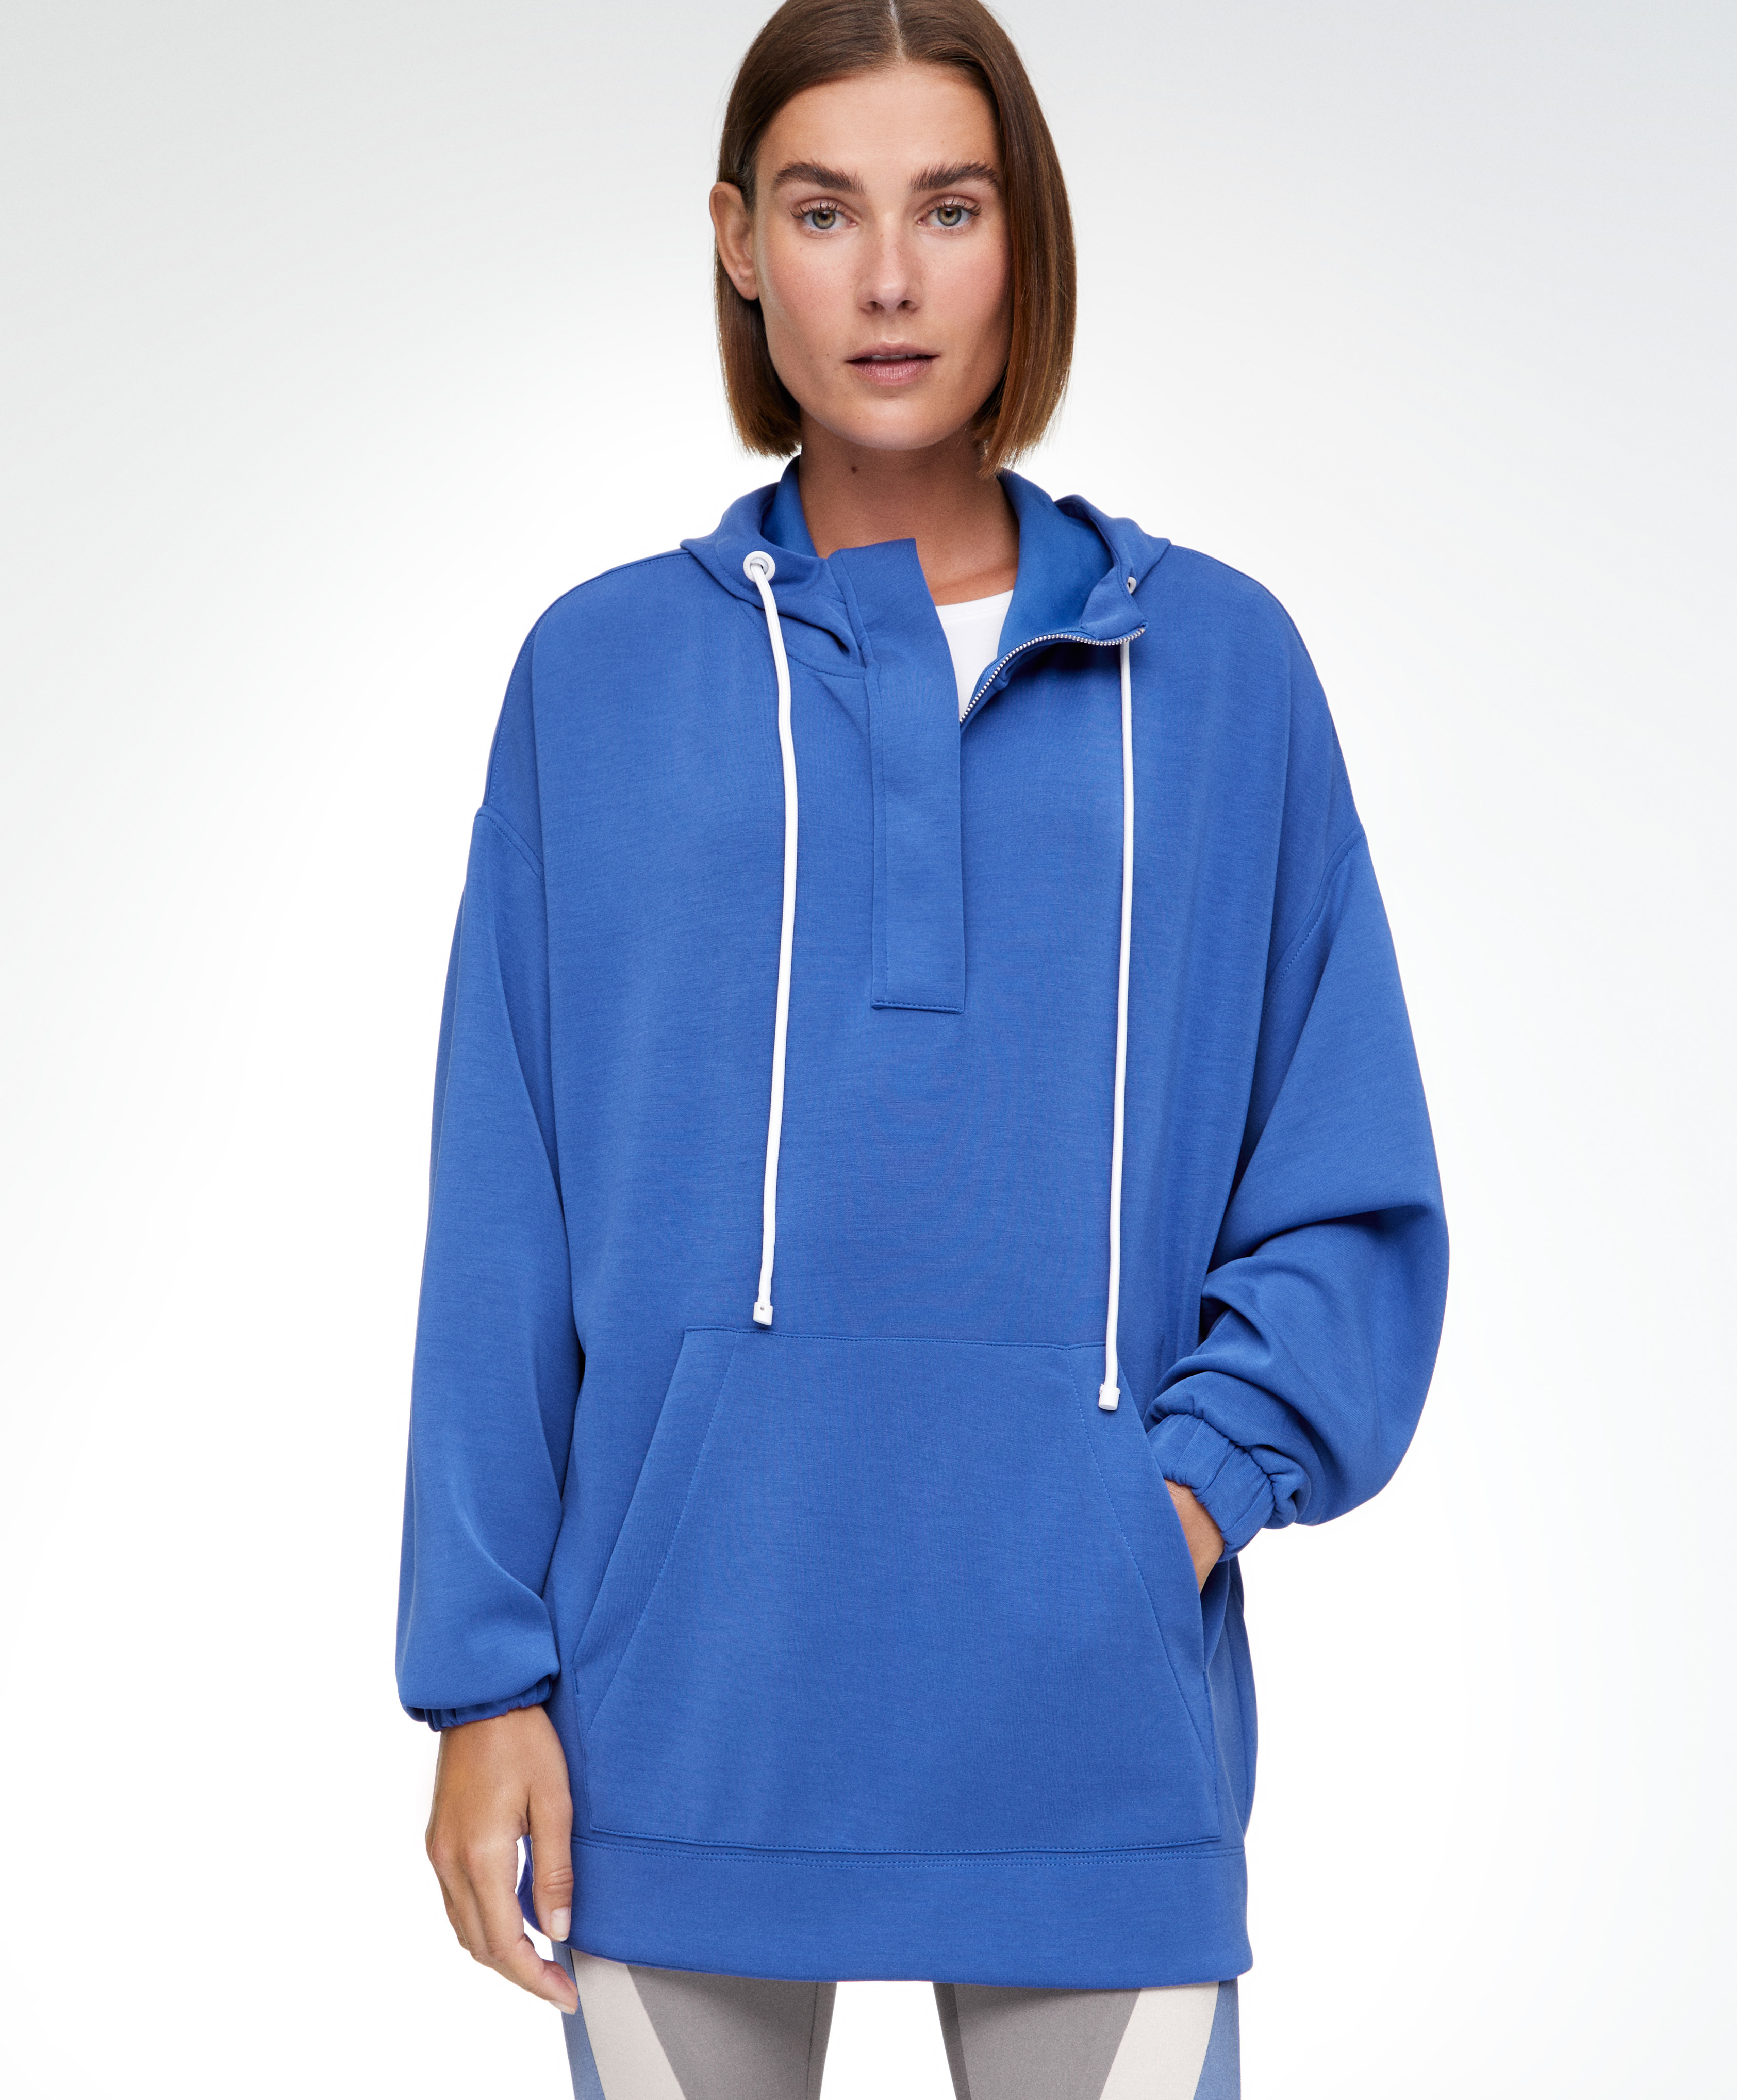 Zip soft-touch modal oversize sweater